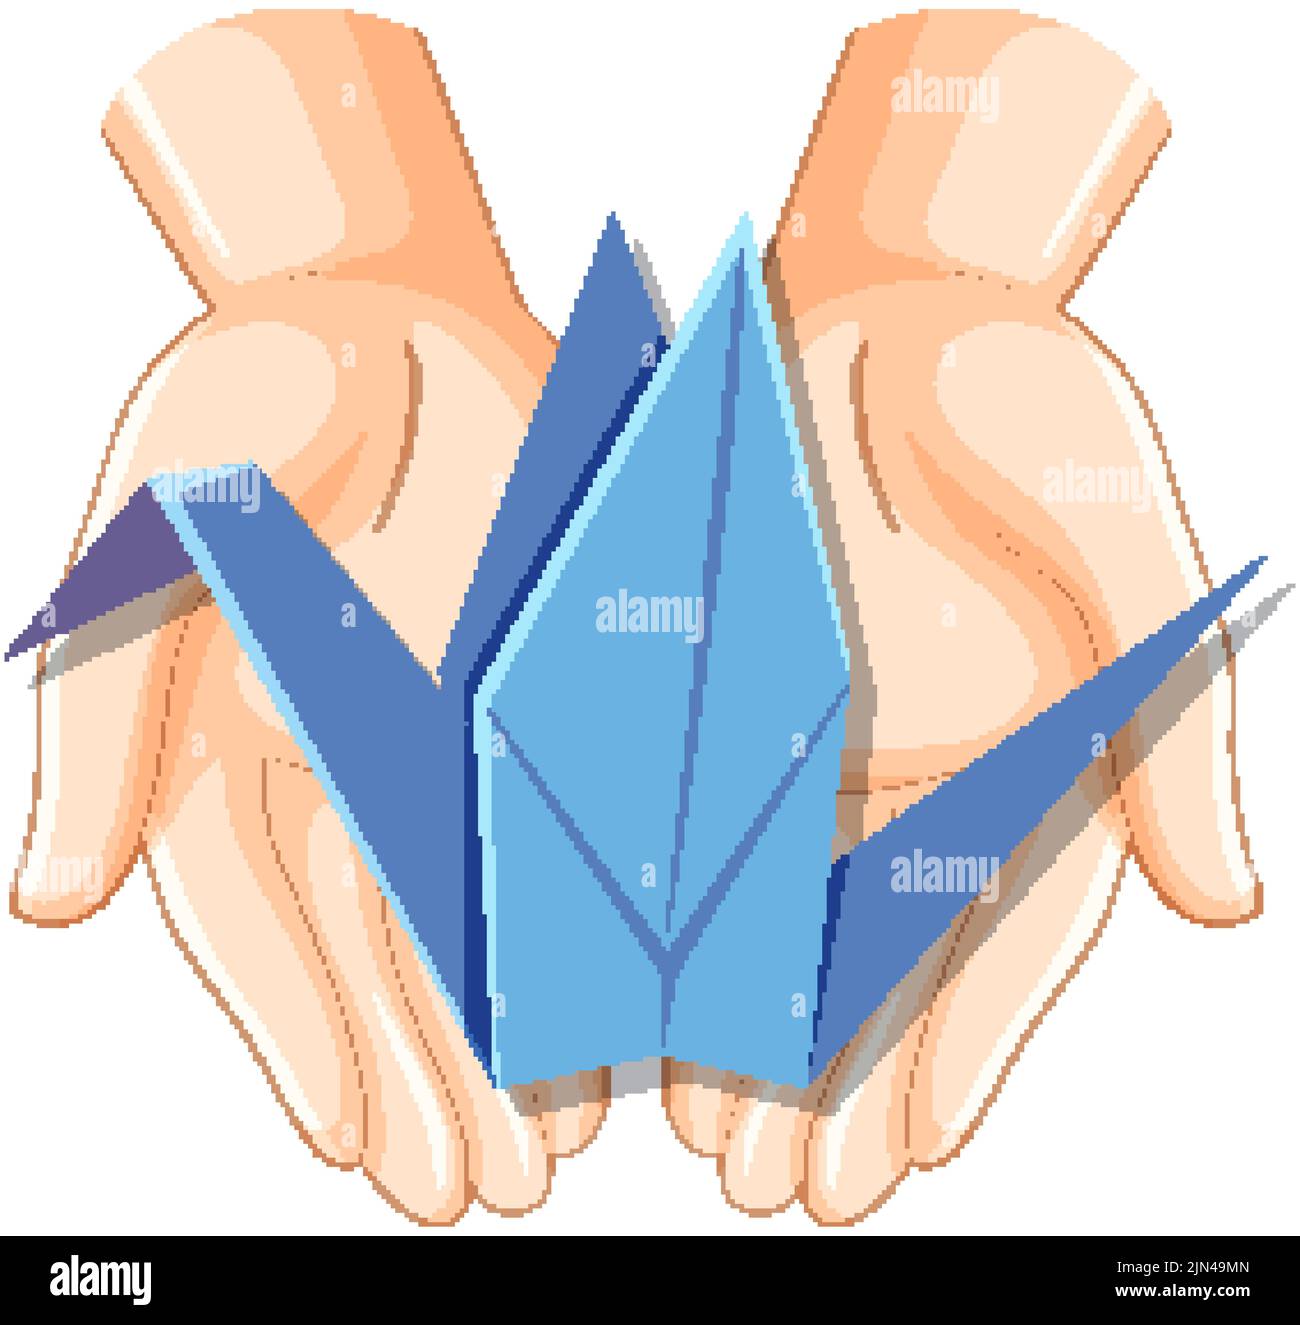 Human hands holding origami bird icon isolated illustration Stock Vector